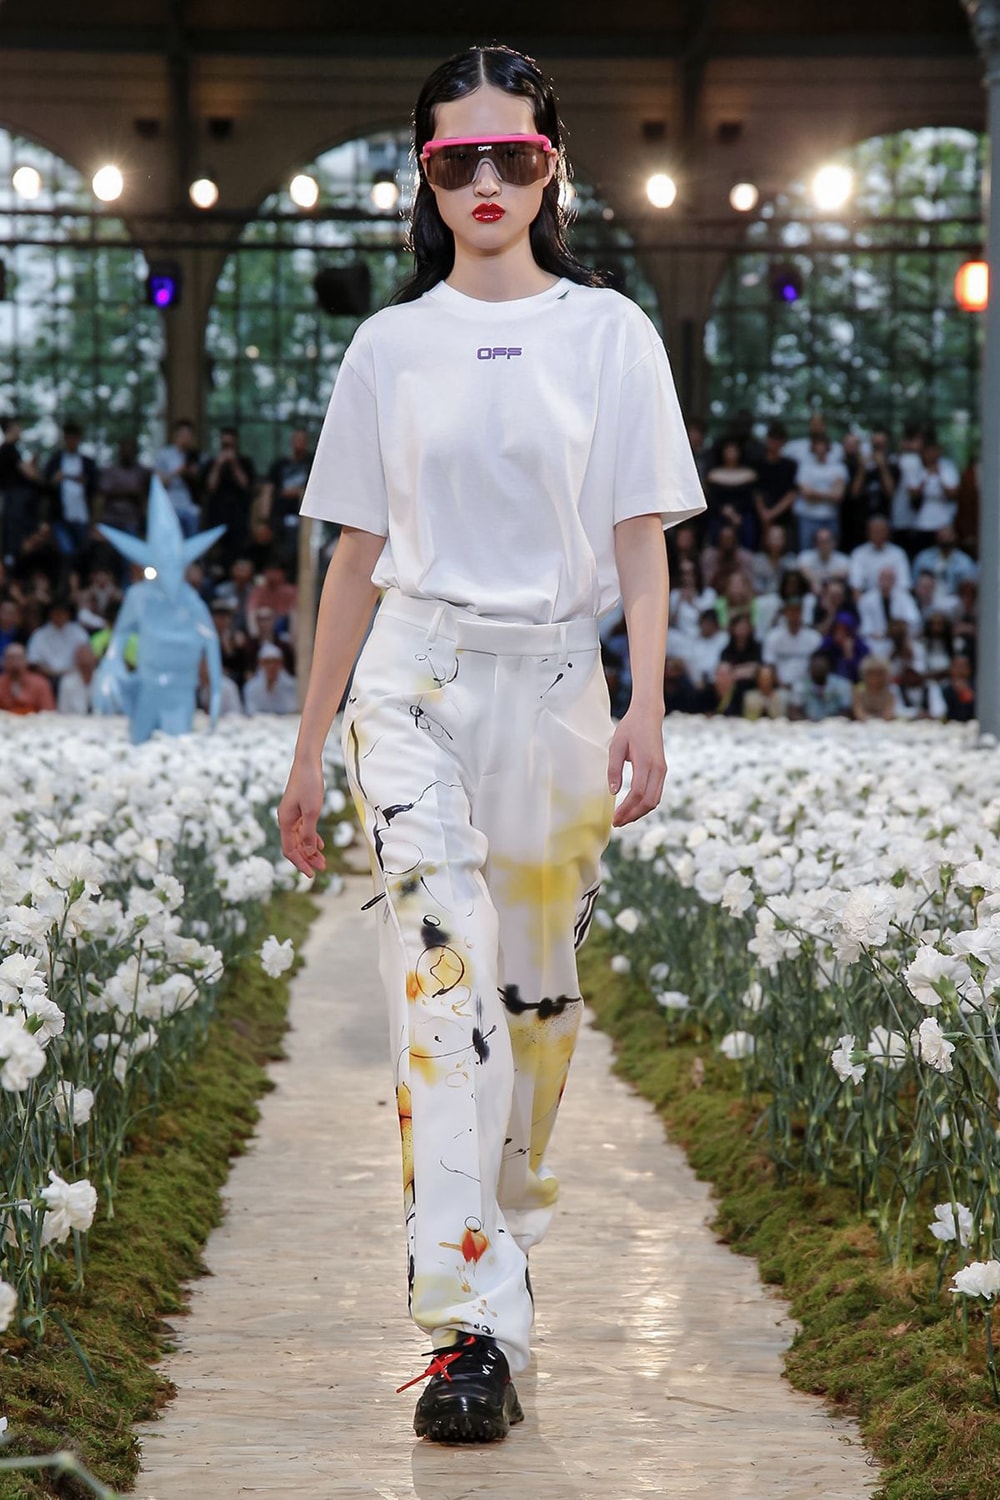 The Top Collections of Spring 2020